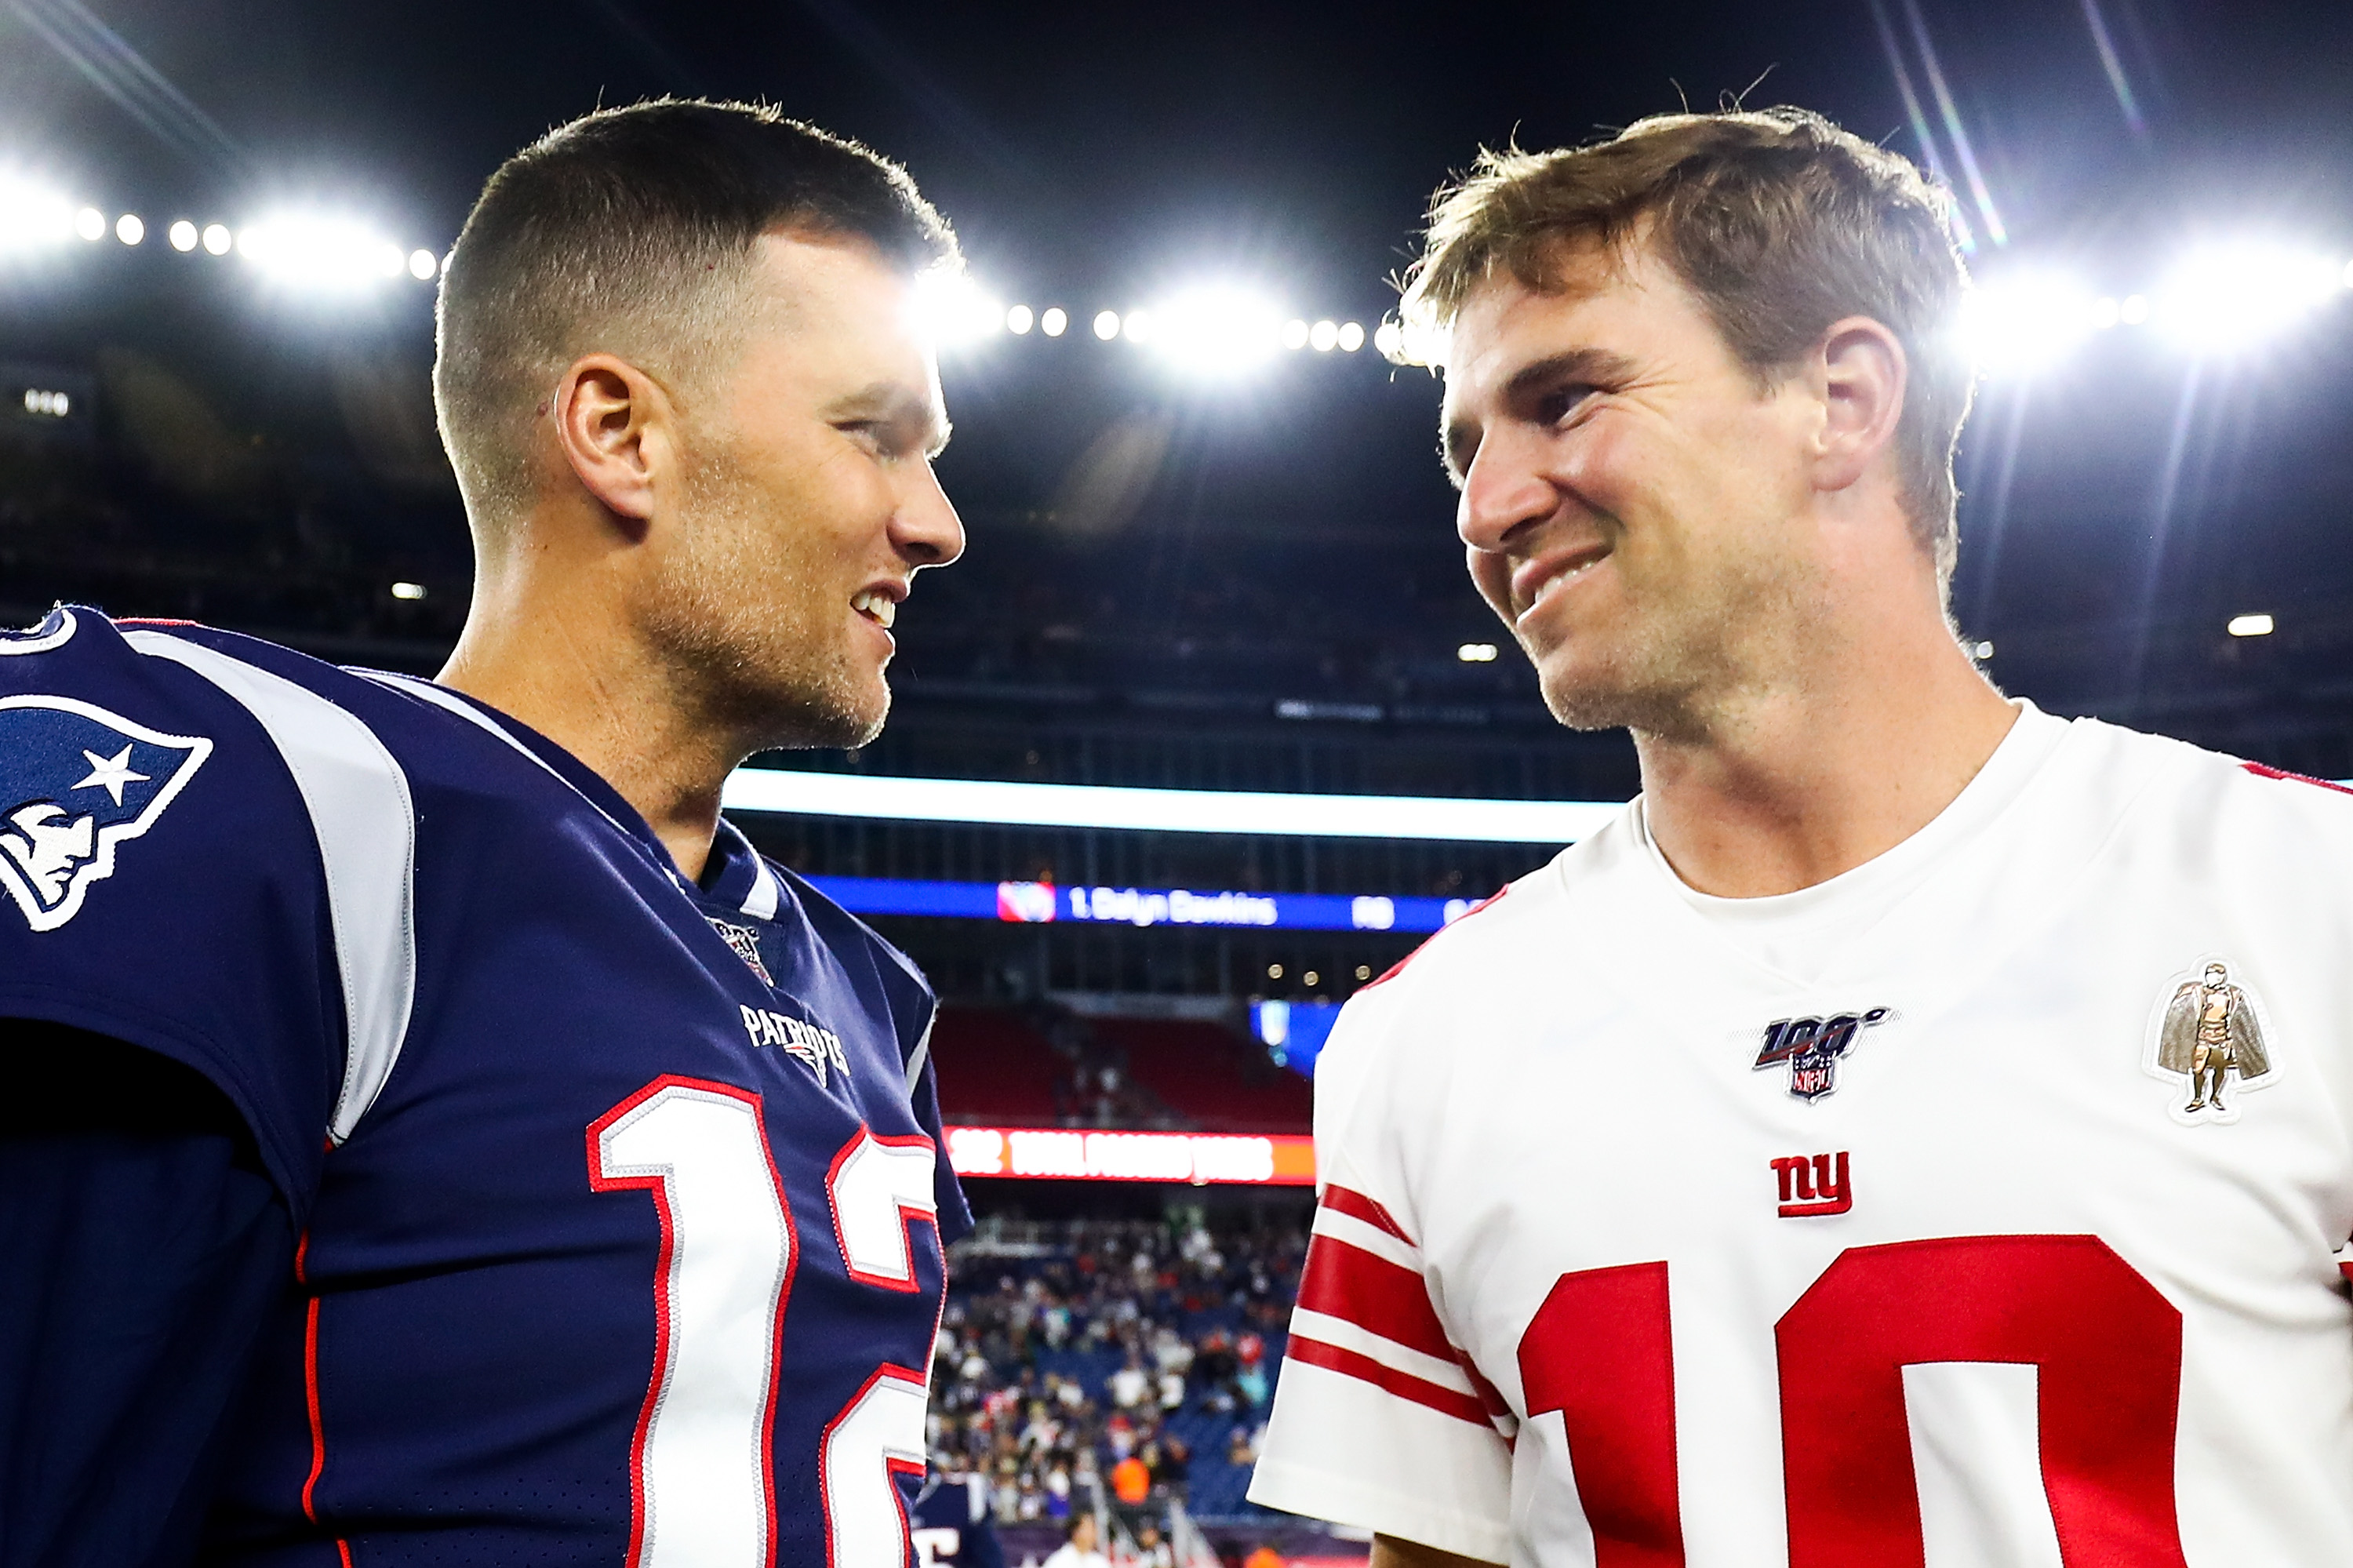 Headed to 10th Super Bowl, Tom Brady Still Bothered By Losses to Eli Manning and NY Giants